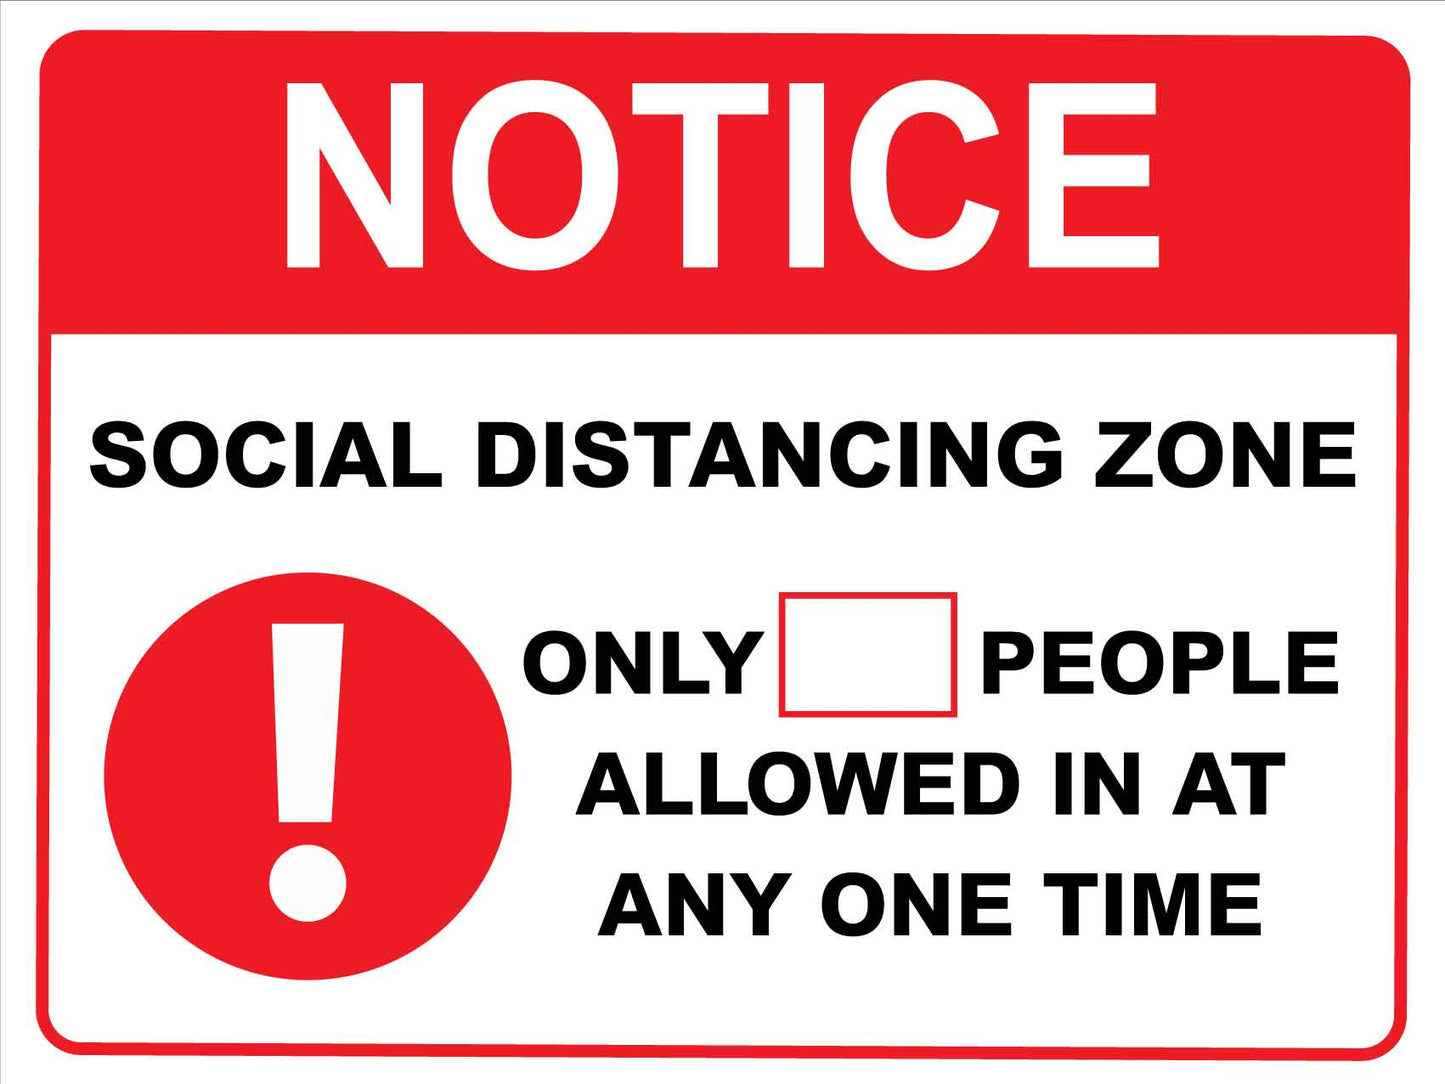 Notice Social Distancing Zone Limited People at One Time Red Sign